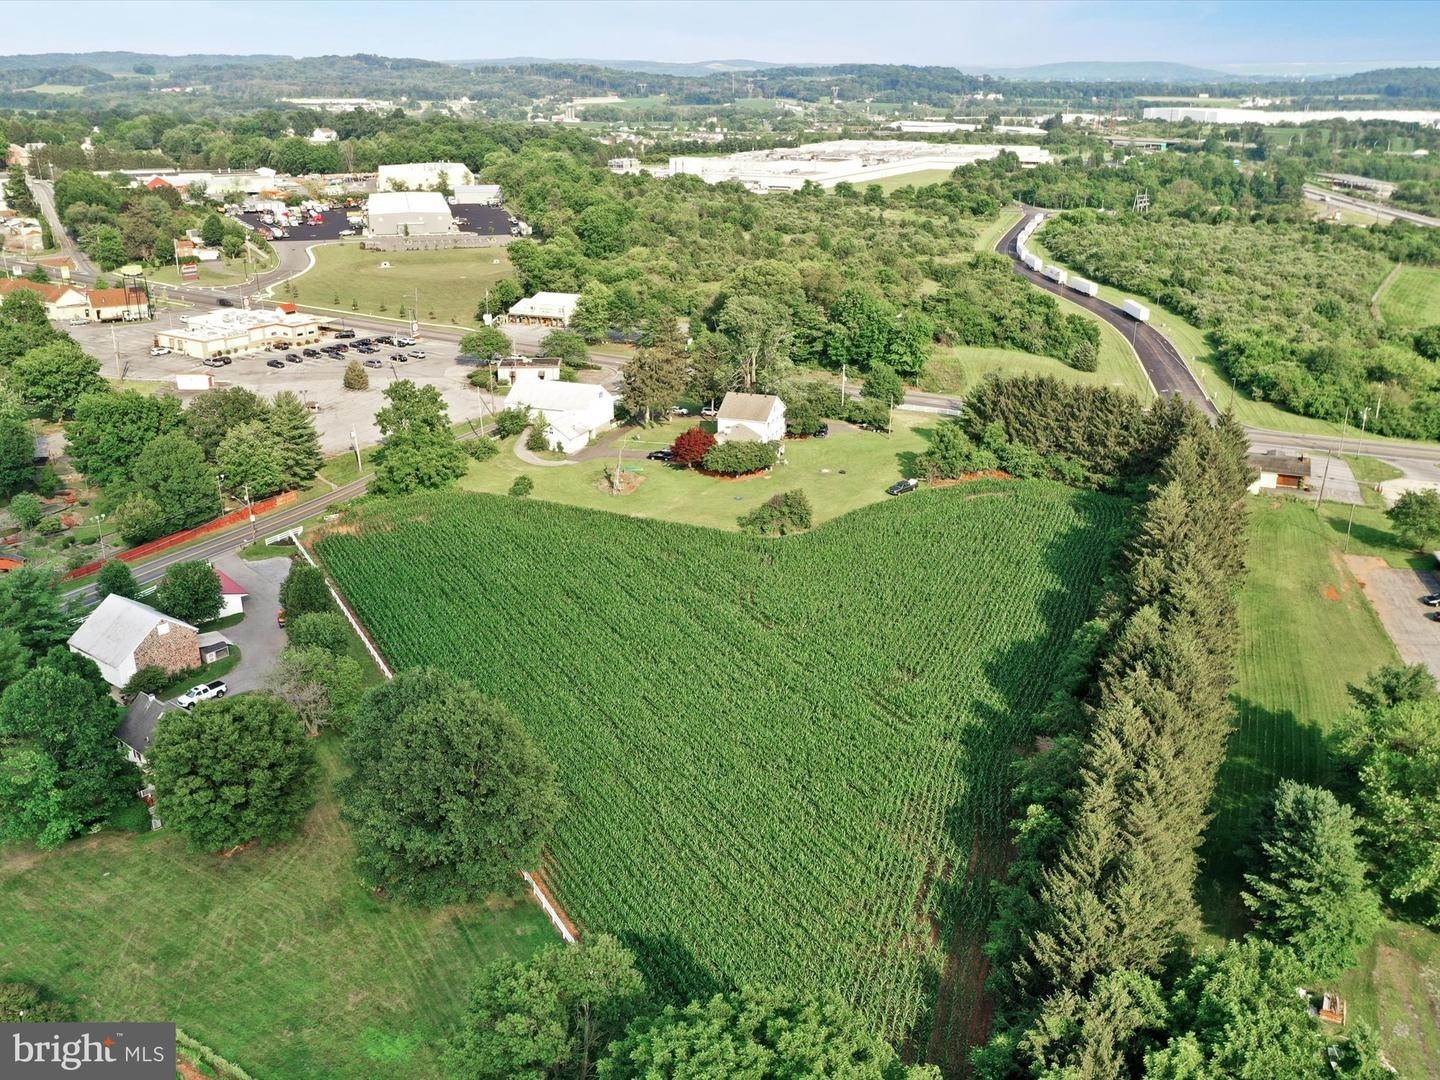 10. Land for Sale at 20 HILL / RT. 272 Road Denver, Pennsylvania 17517 United States